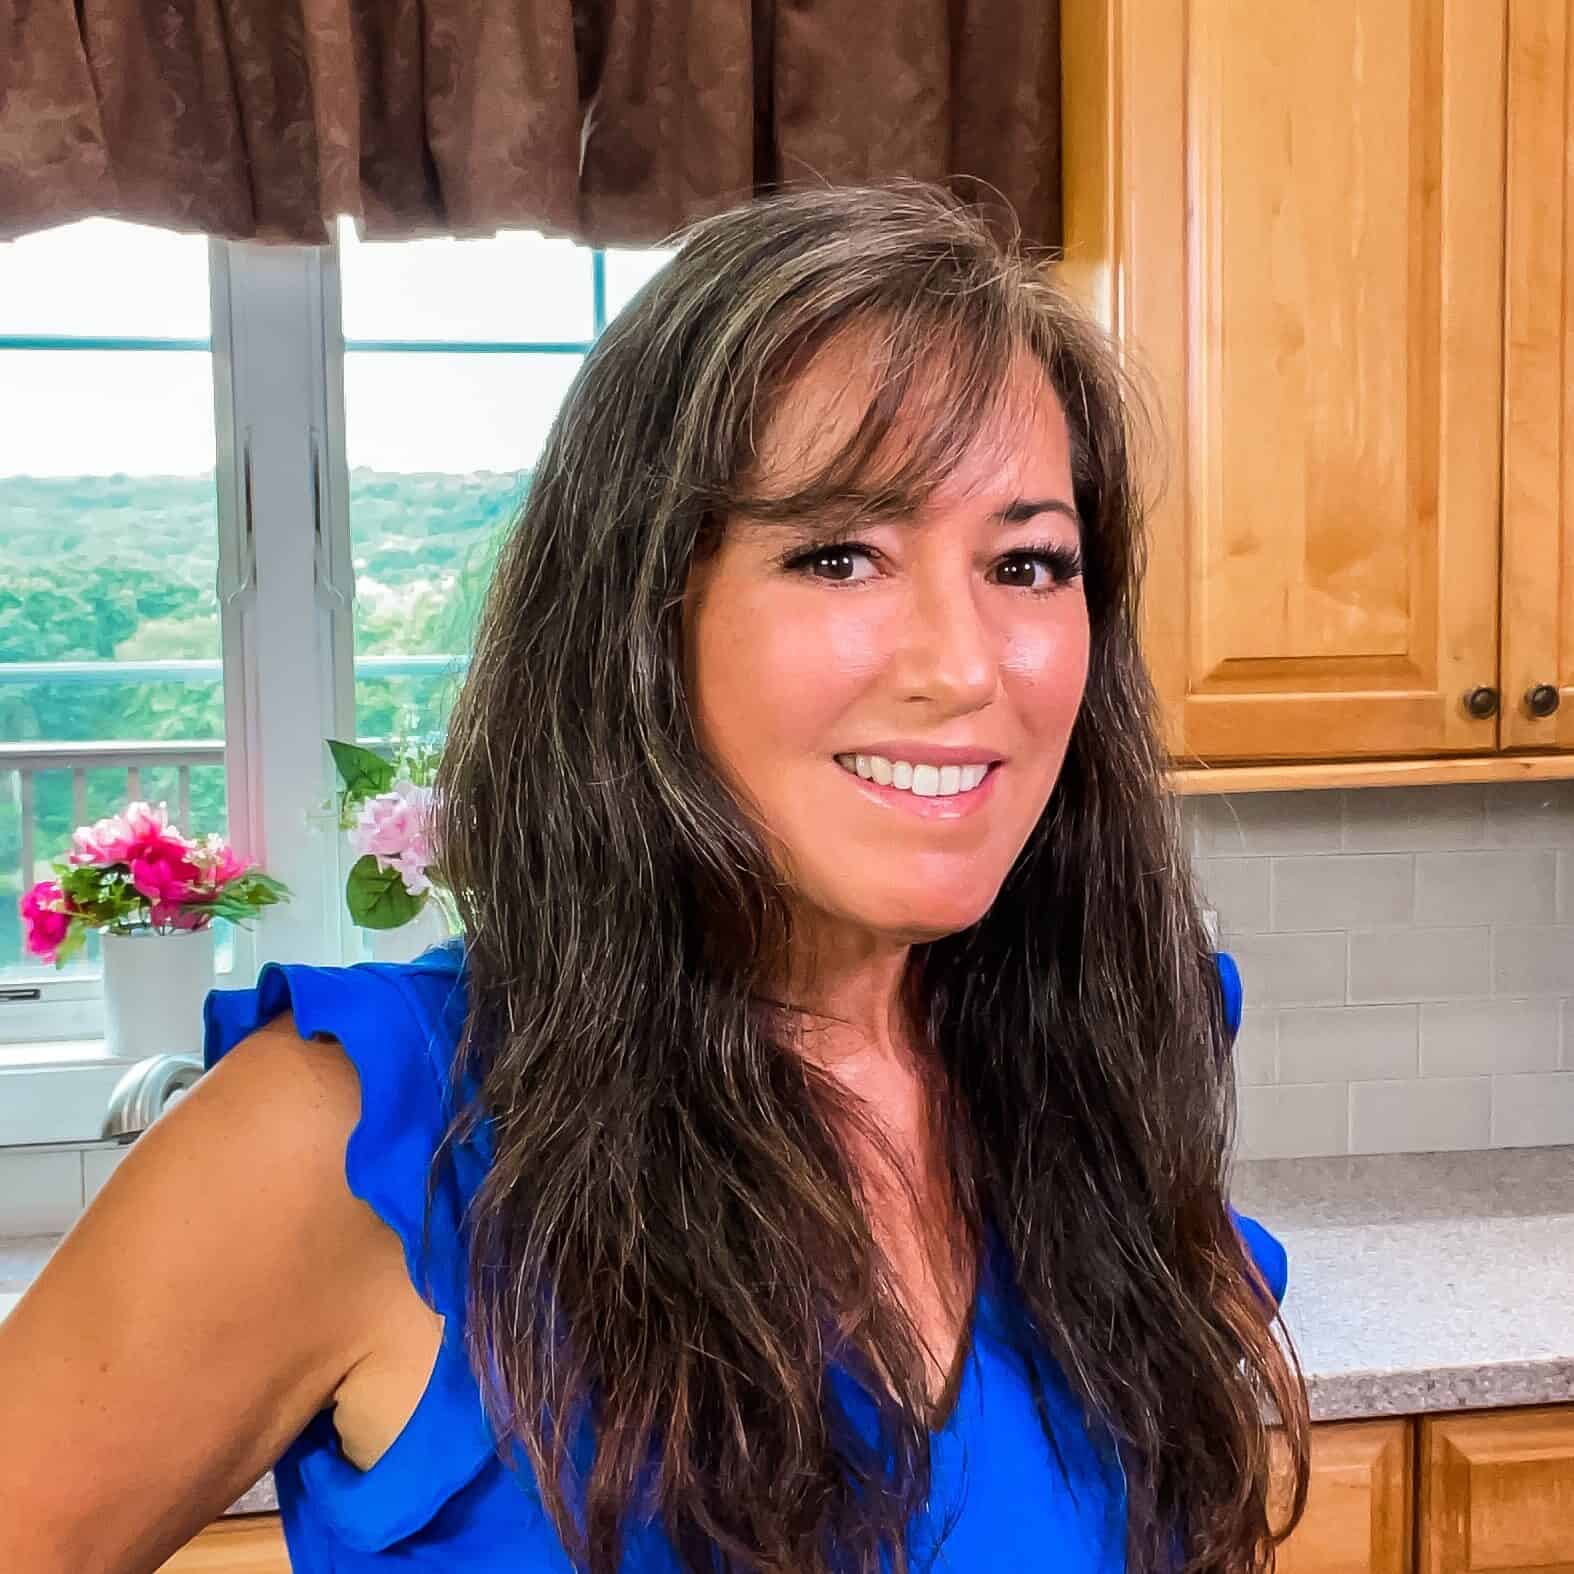 A woman in a blue dress standing in a kitchen.